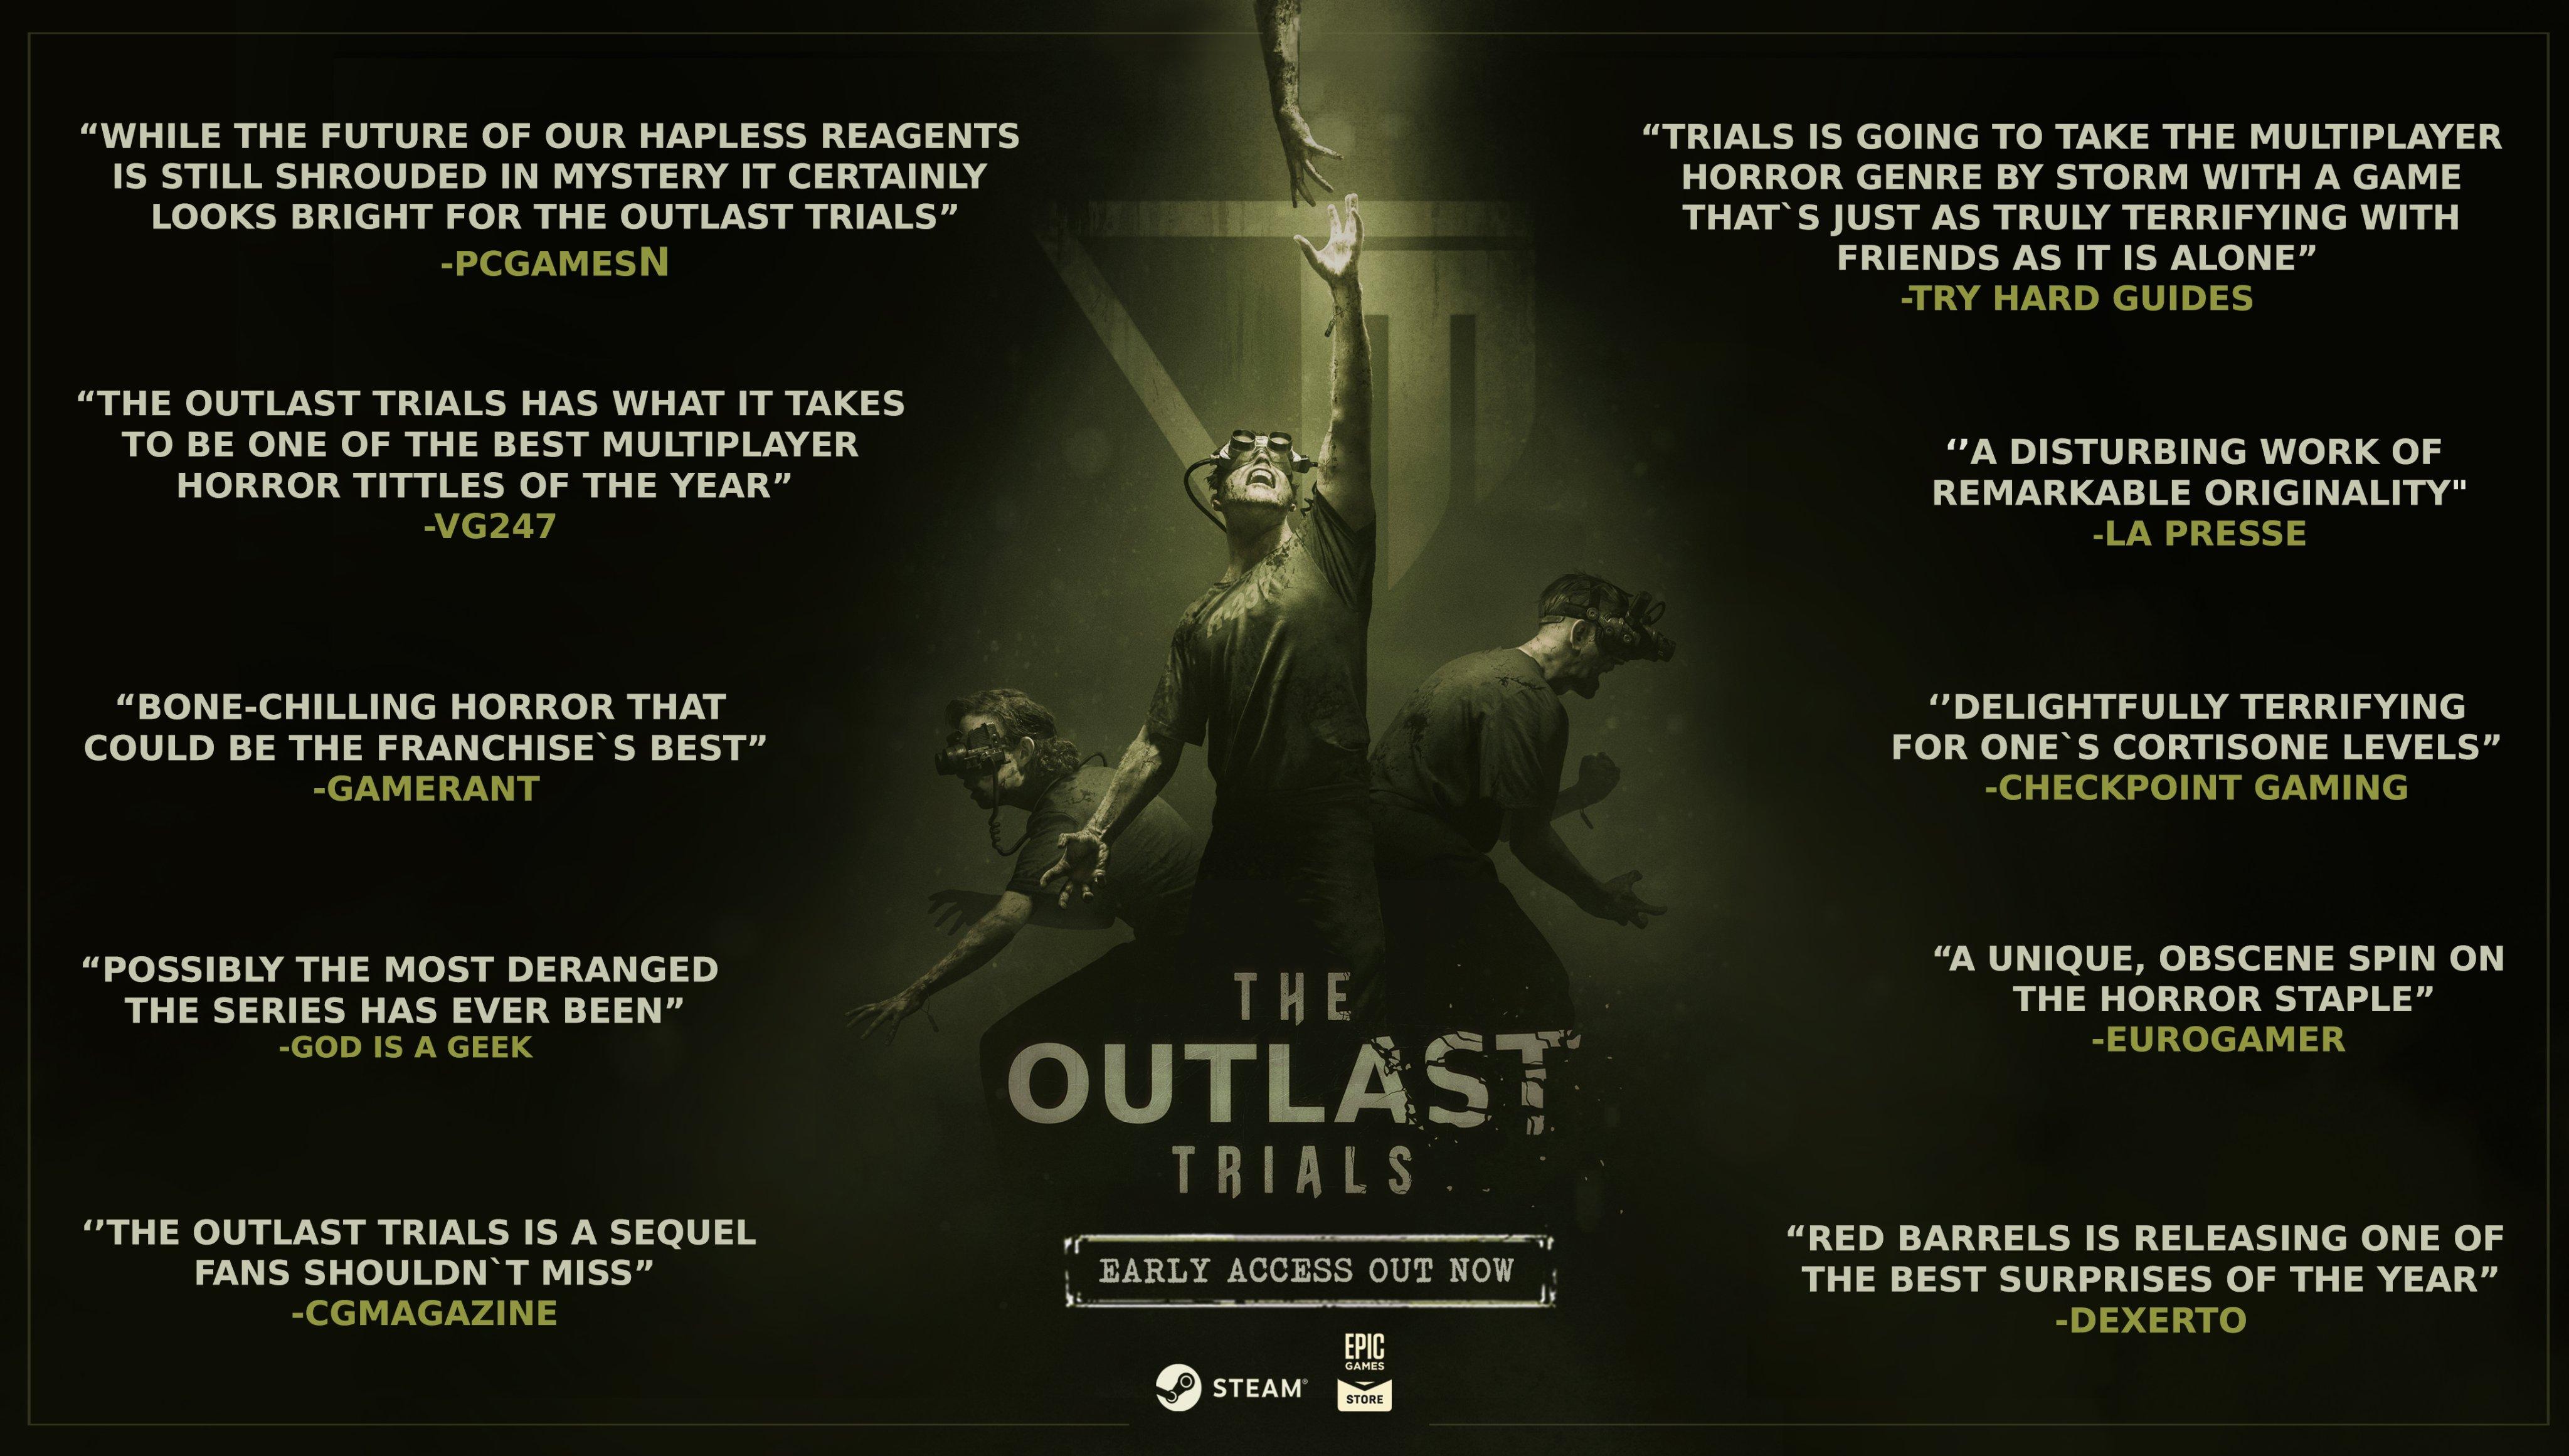 Red Barrels on The Outlast Trials has sold over 500k